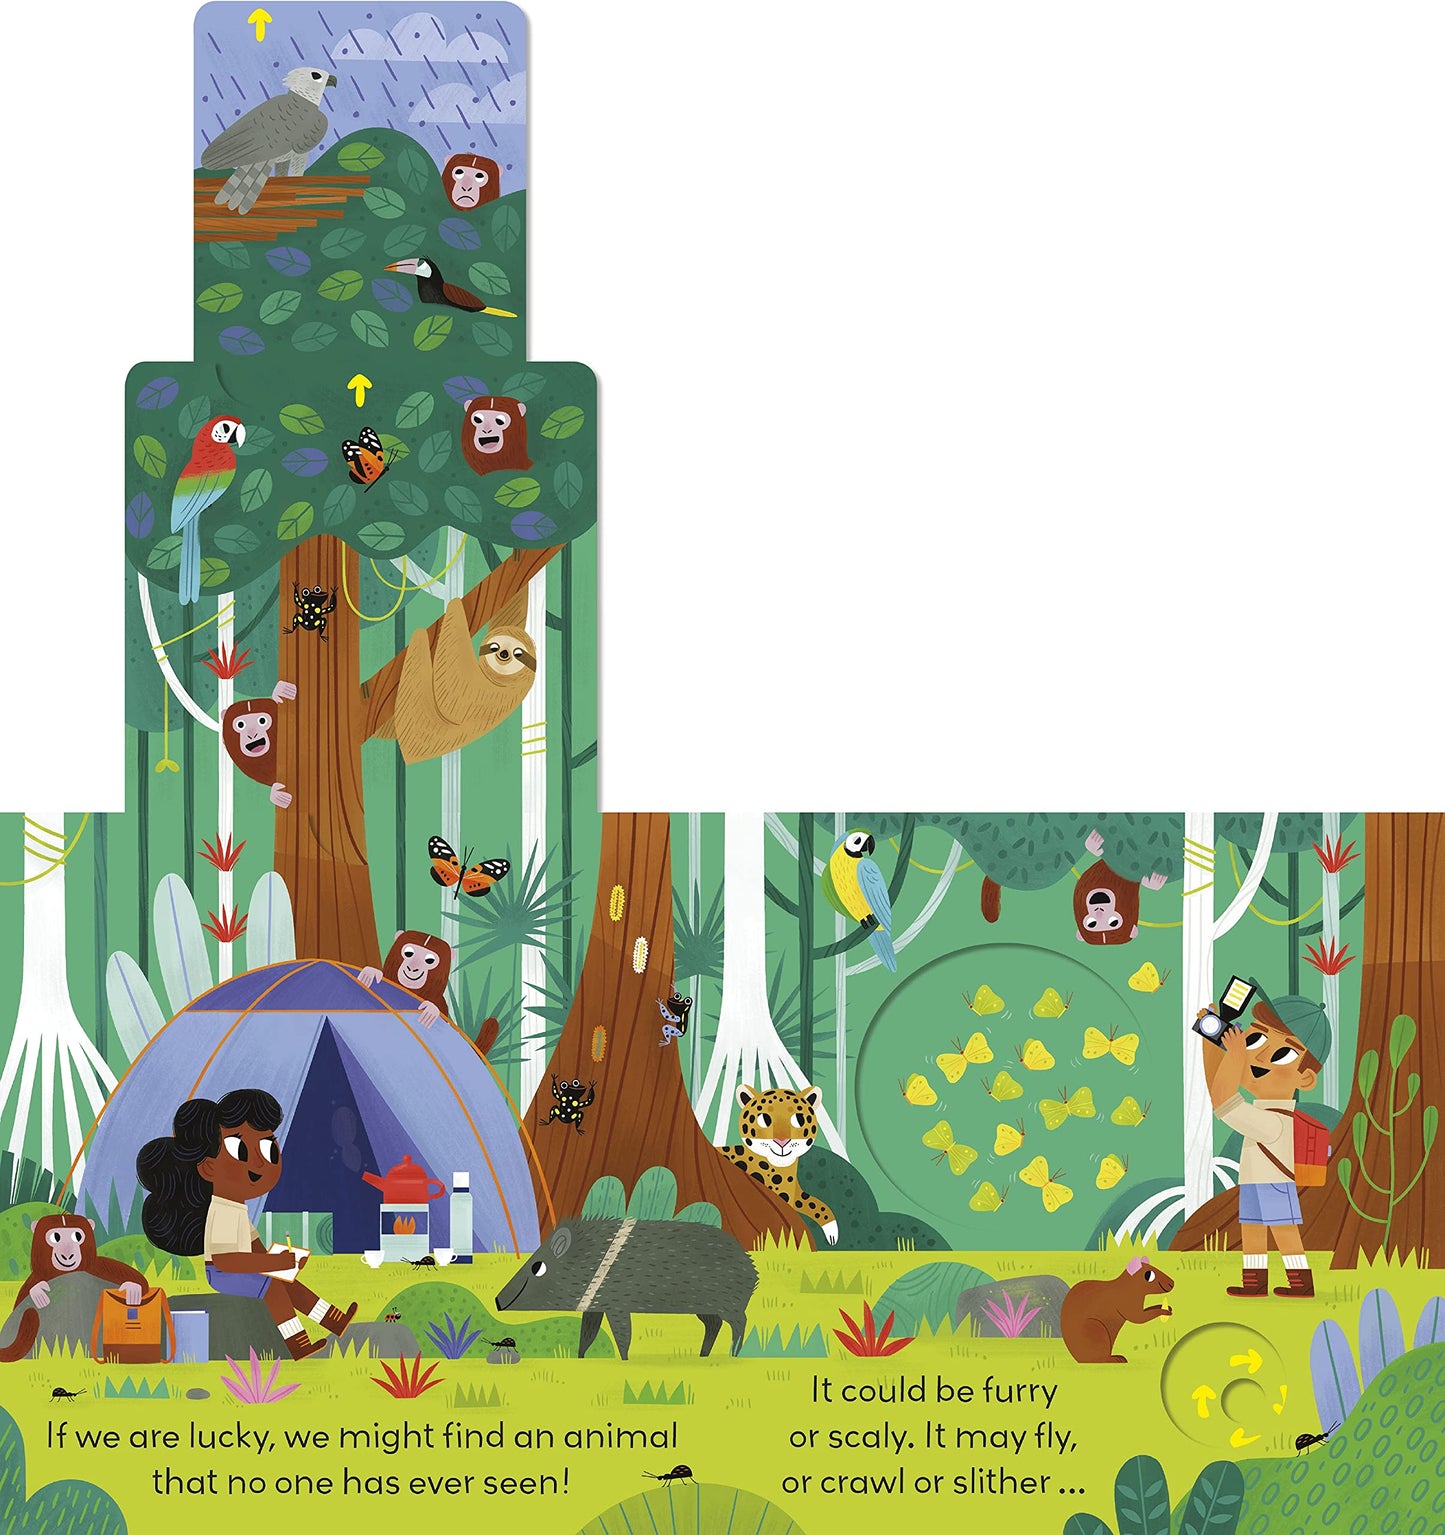 Interactive children's books with puzzles, lift-the-flap and peek-through options for an enjoyable pre-bedtime read! Little World Jungle Journey